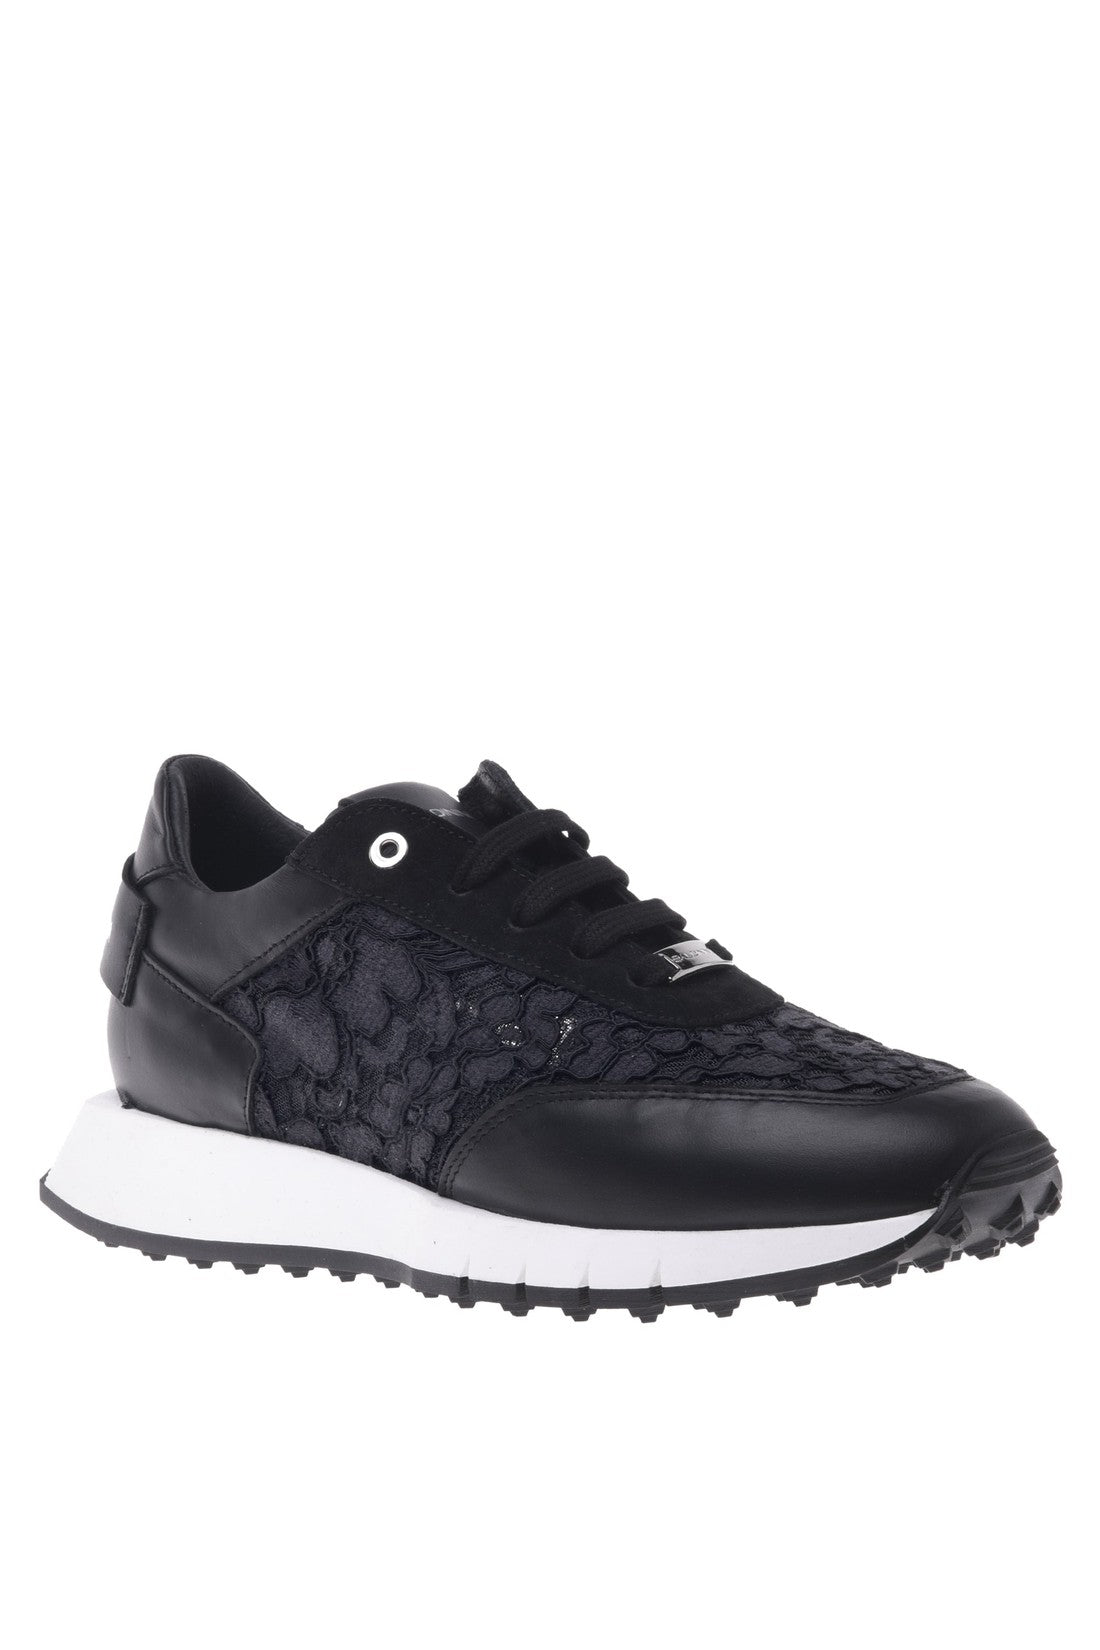 BALDININI-OUTLET-SALE-Sneaker-in-black-nappa-leather-and-lace-Sneaker-35-ARCHIVE-COLLECTION_72b27453-210e-4ca0-a2d0-44bdd61a522f.jpg